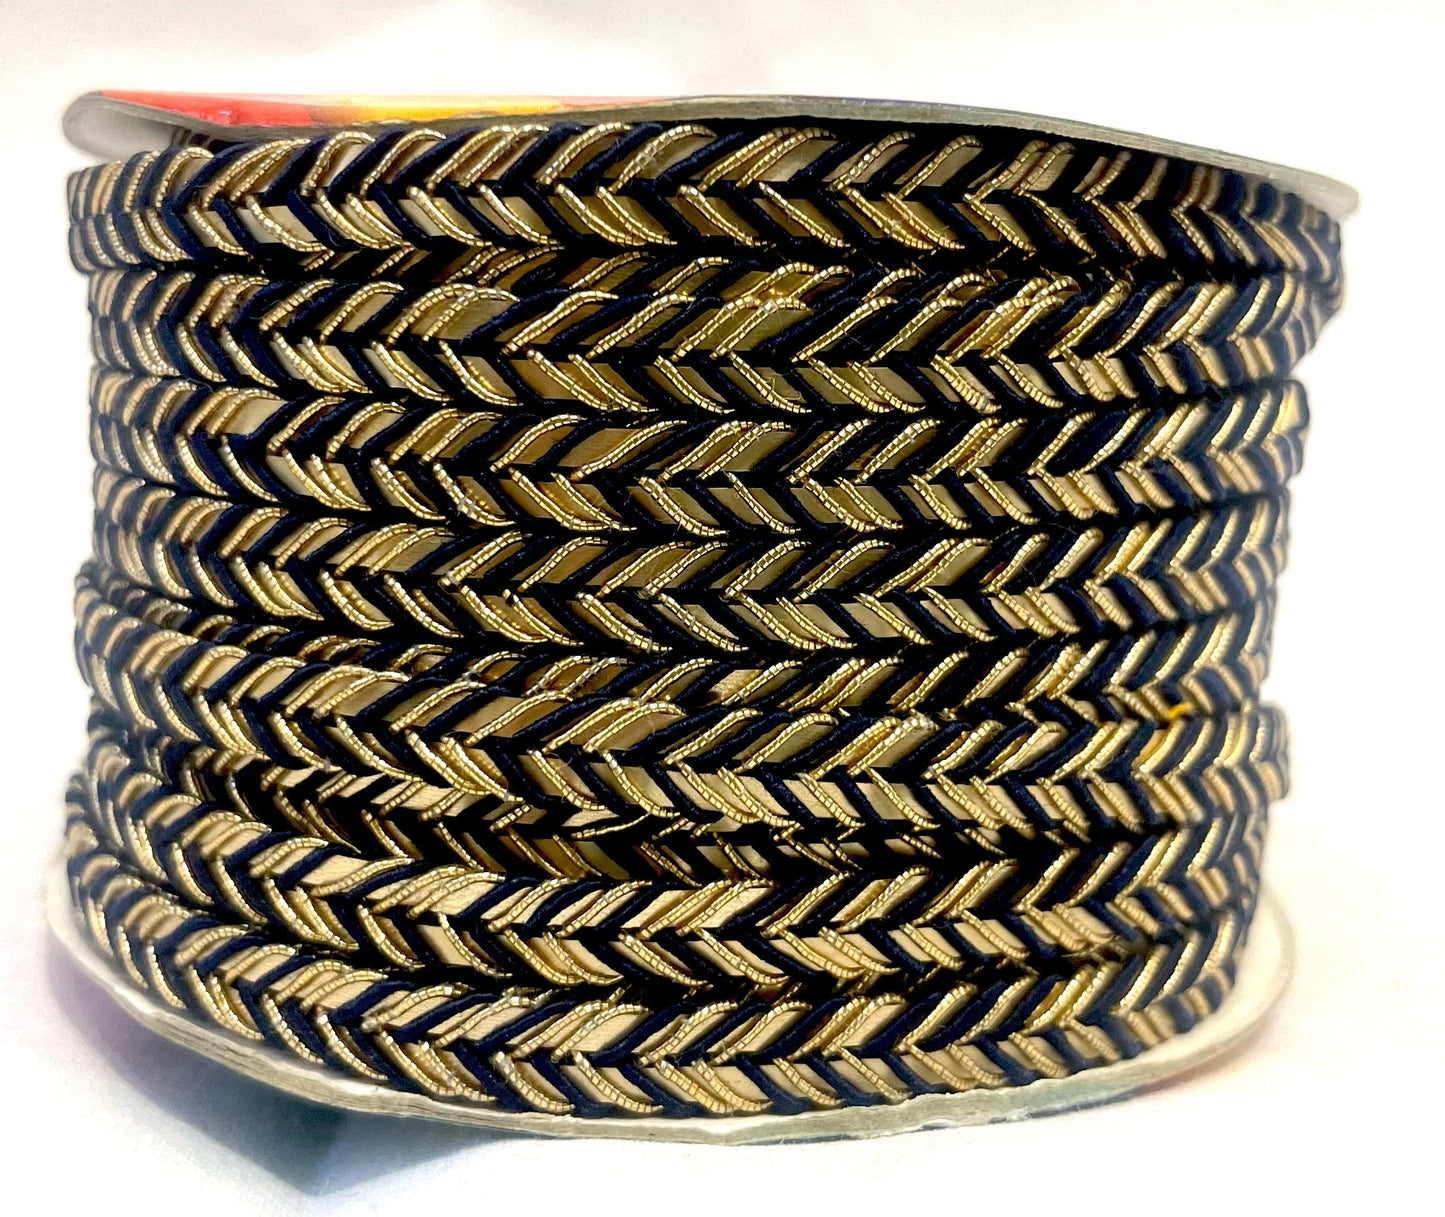 Golden Braid Border, Brown And Golden,  Laces for Dress, Home Décor, Shoe, Bags, Hats, DIY, Handmade, 0.2 inch Broad